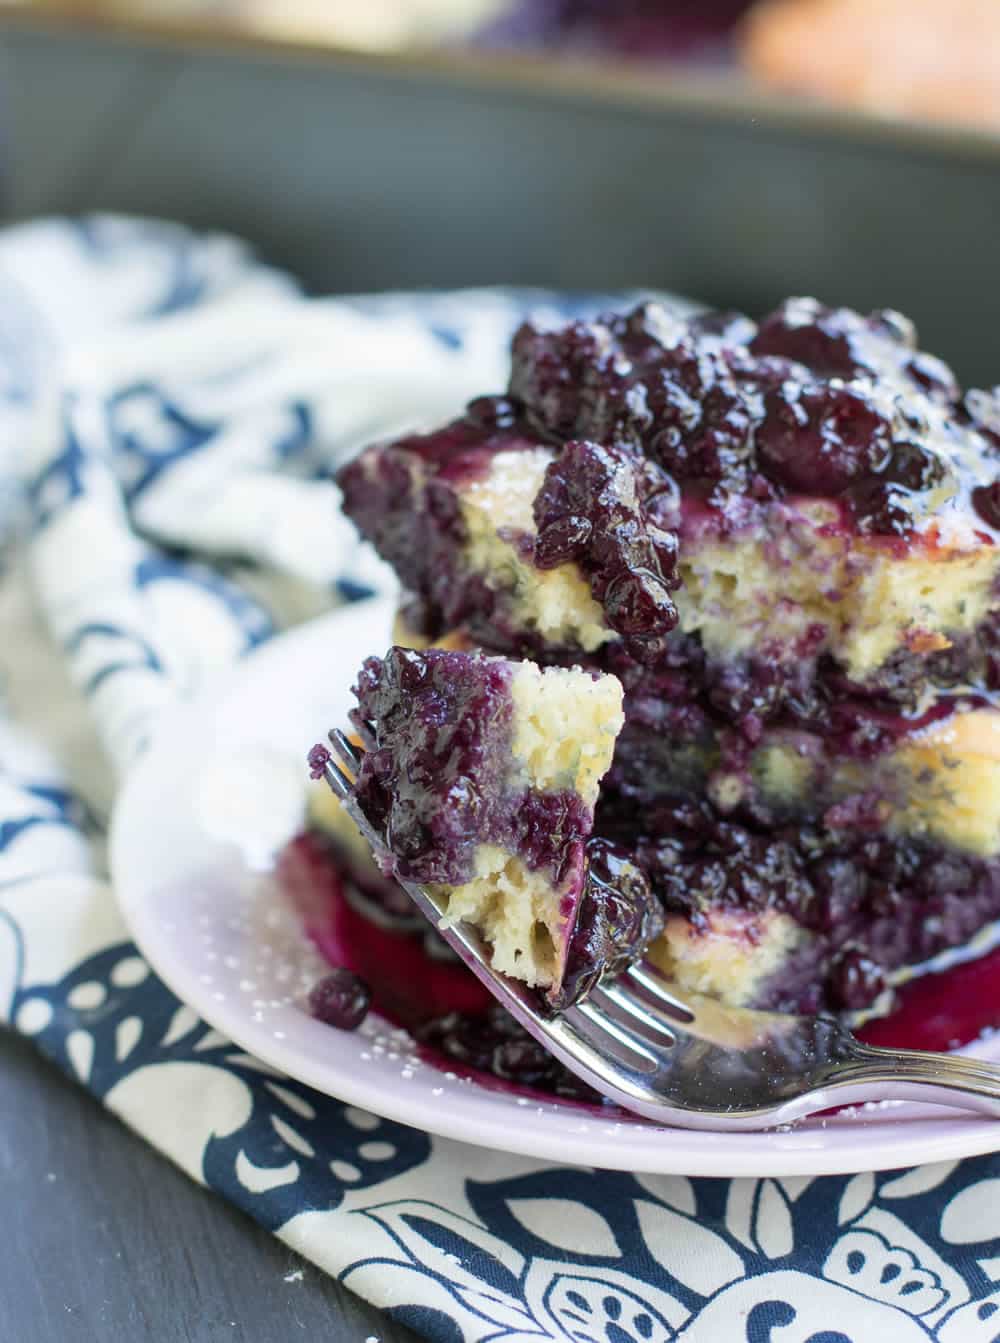 Blueberry Pancake Cobbler. Instead of flipping a bunch of pancakes, bake them in a pan with blueberries and you'll have a built in fruit topping!